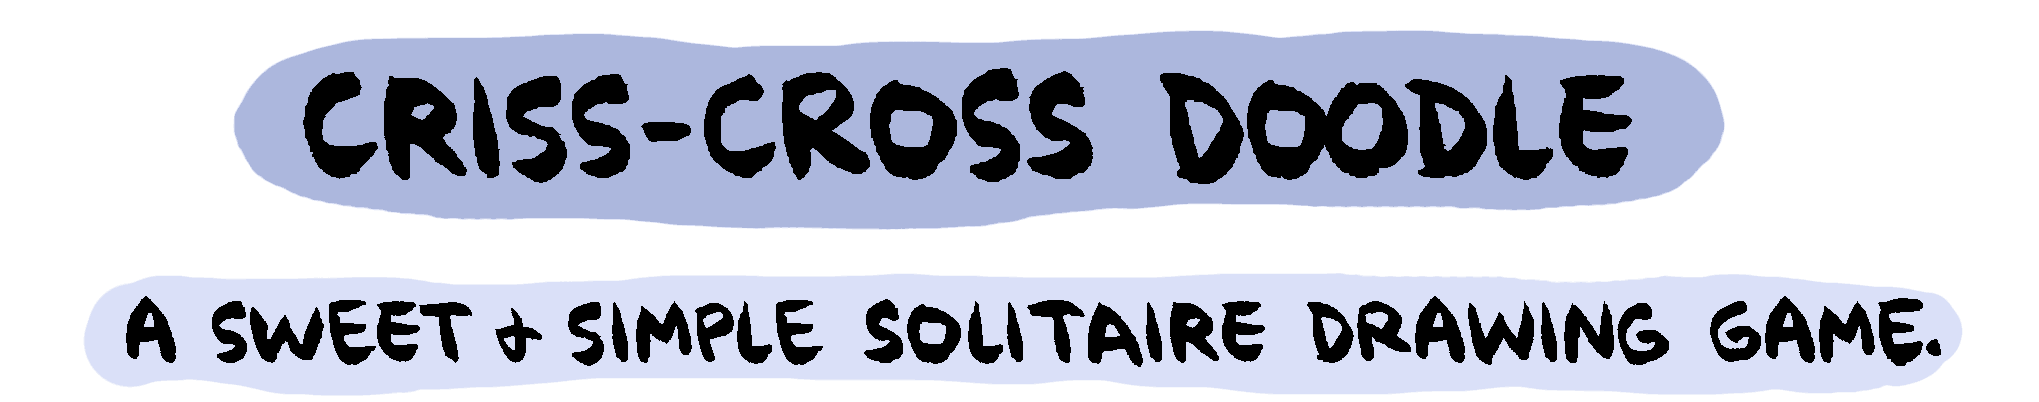 Criss-Cross Doodle: A sweet and simple solitaire drawing game by Ellen Forney.